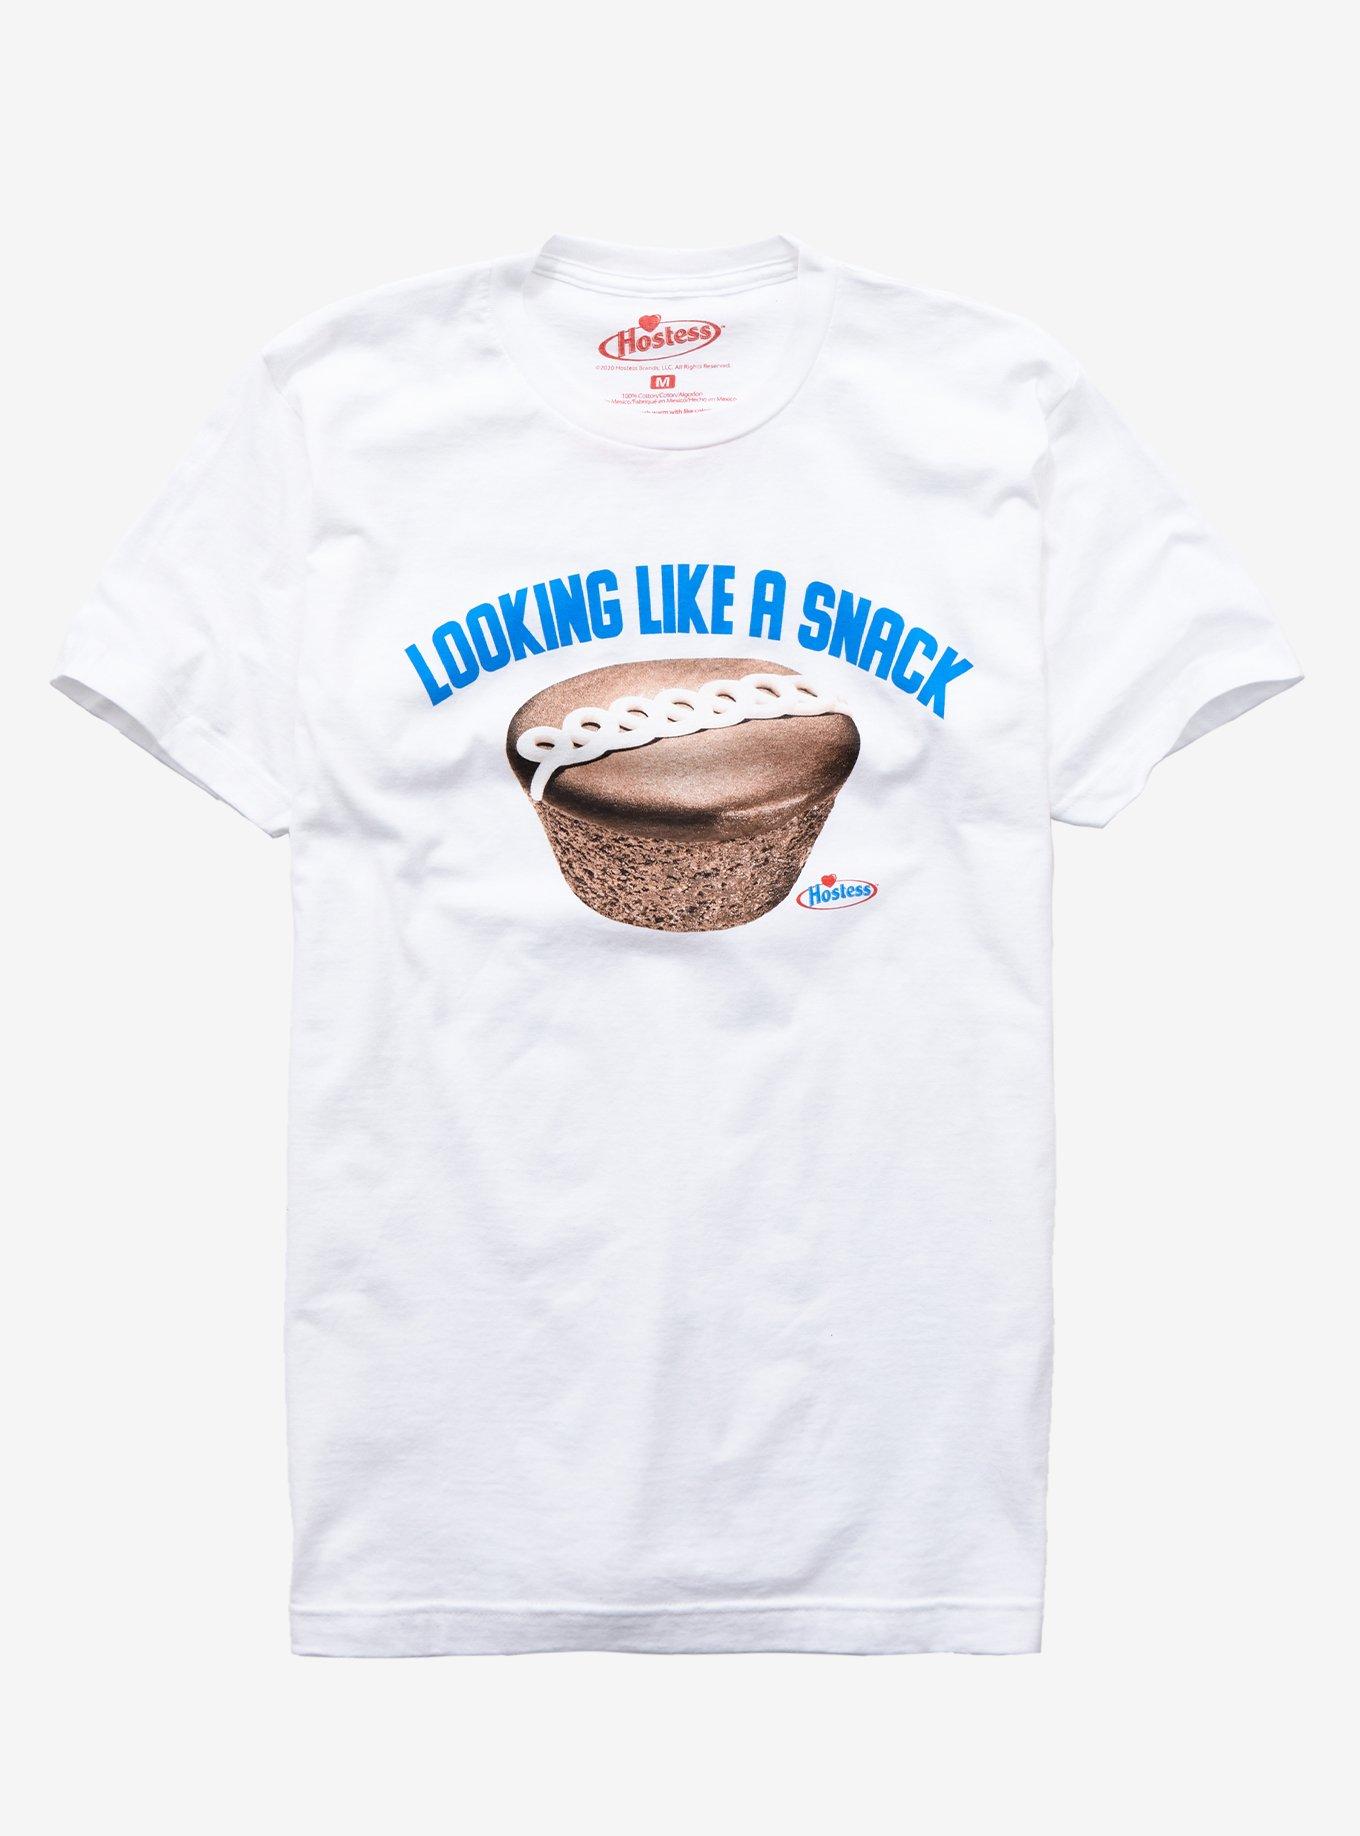 Hostess Looking Like A Snack Cupcake Girls T-Shirt, MULTI, hi-res